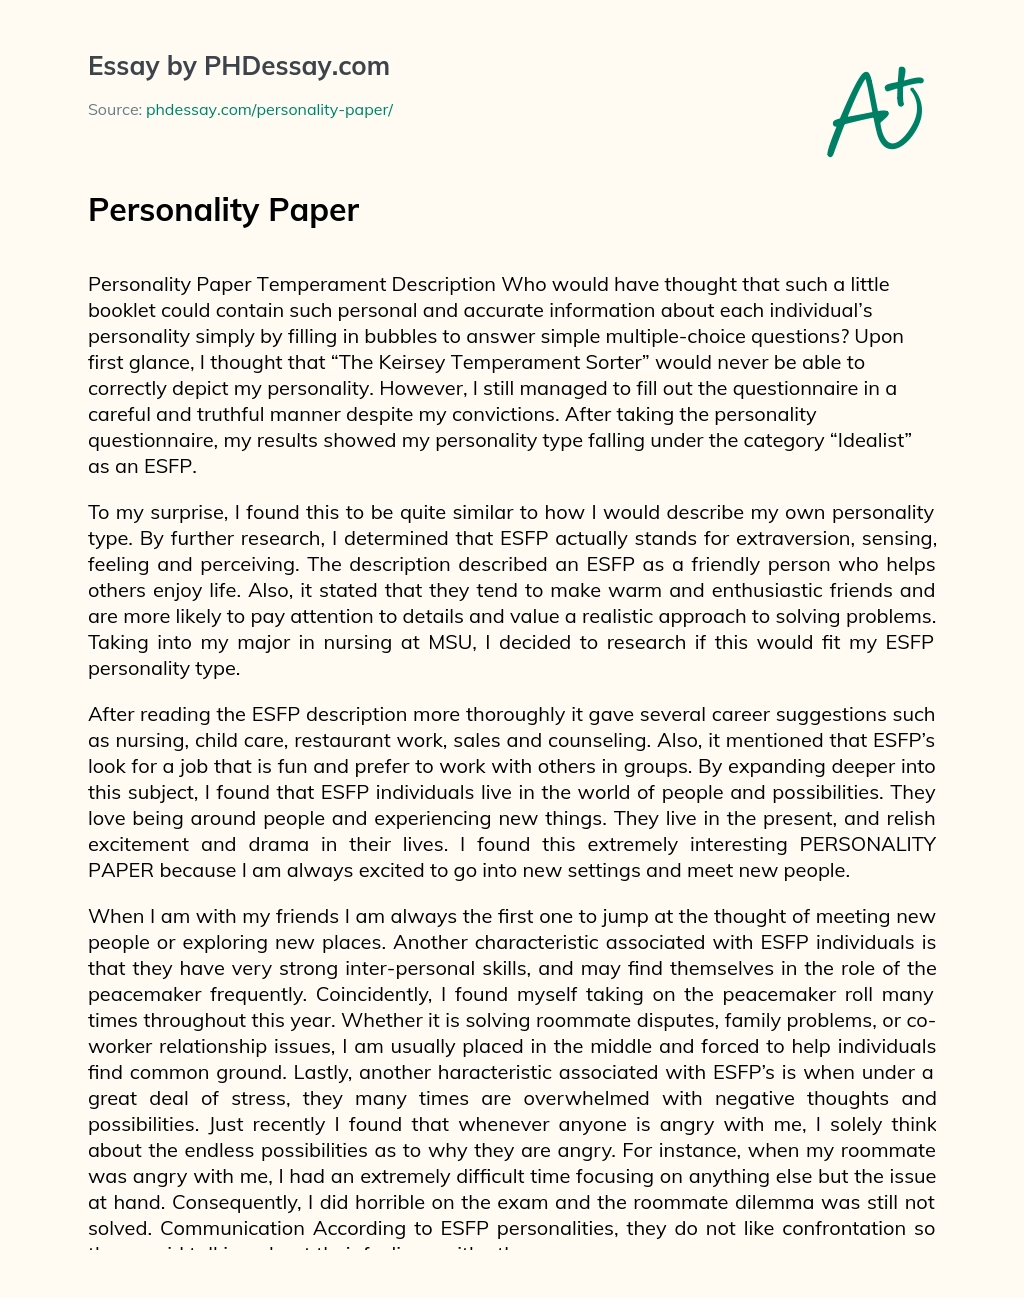 Personality Paper essay